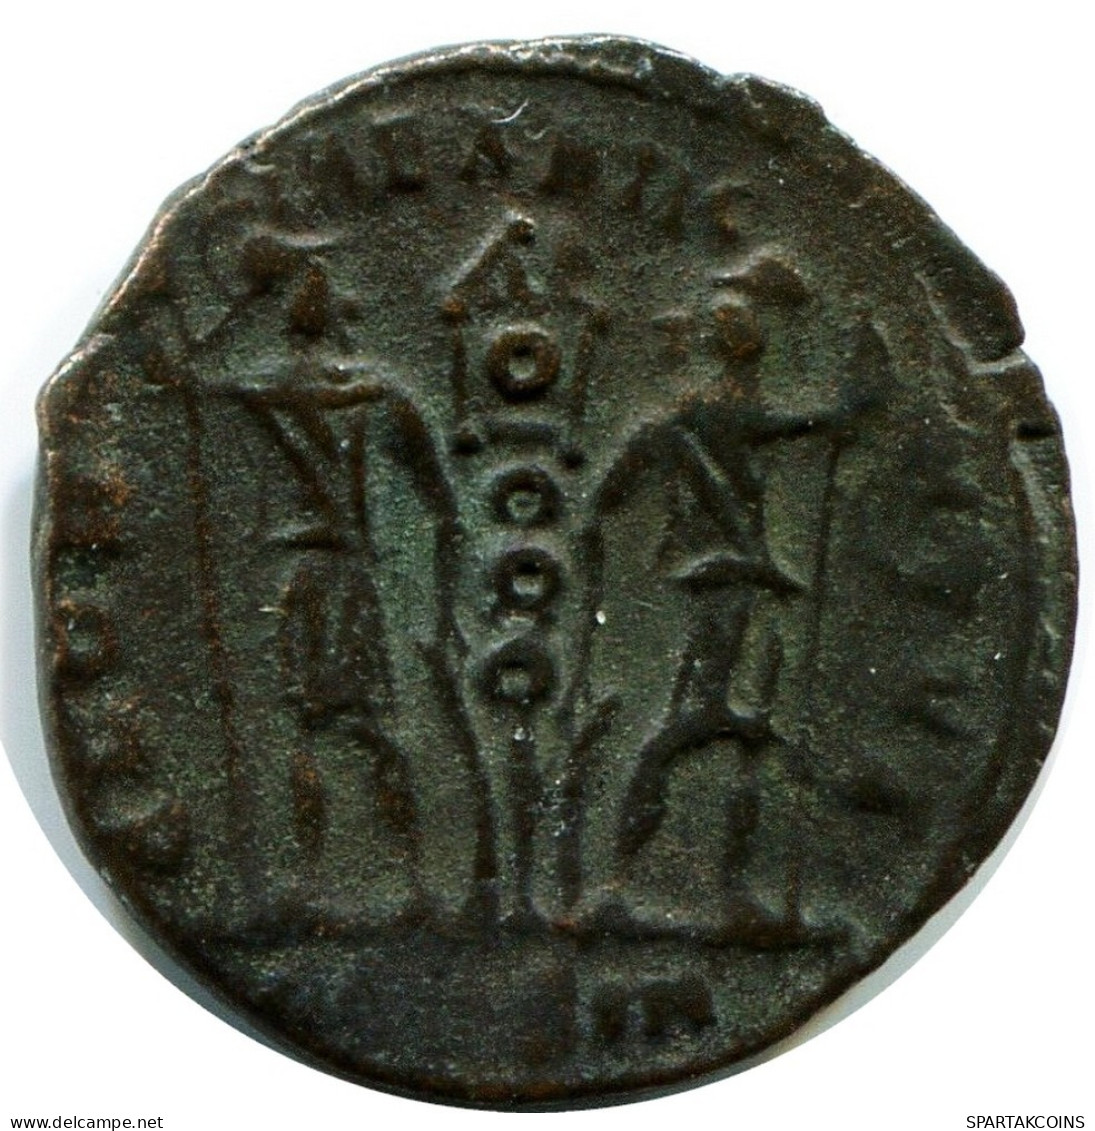 CONSTANS MINTED IN CONSTANTINOPLE FOUND IN IHNASYAH HOARD EGYPT #ANC11958.14.D.A - El Impero Christiano (307 / 363)